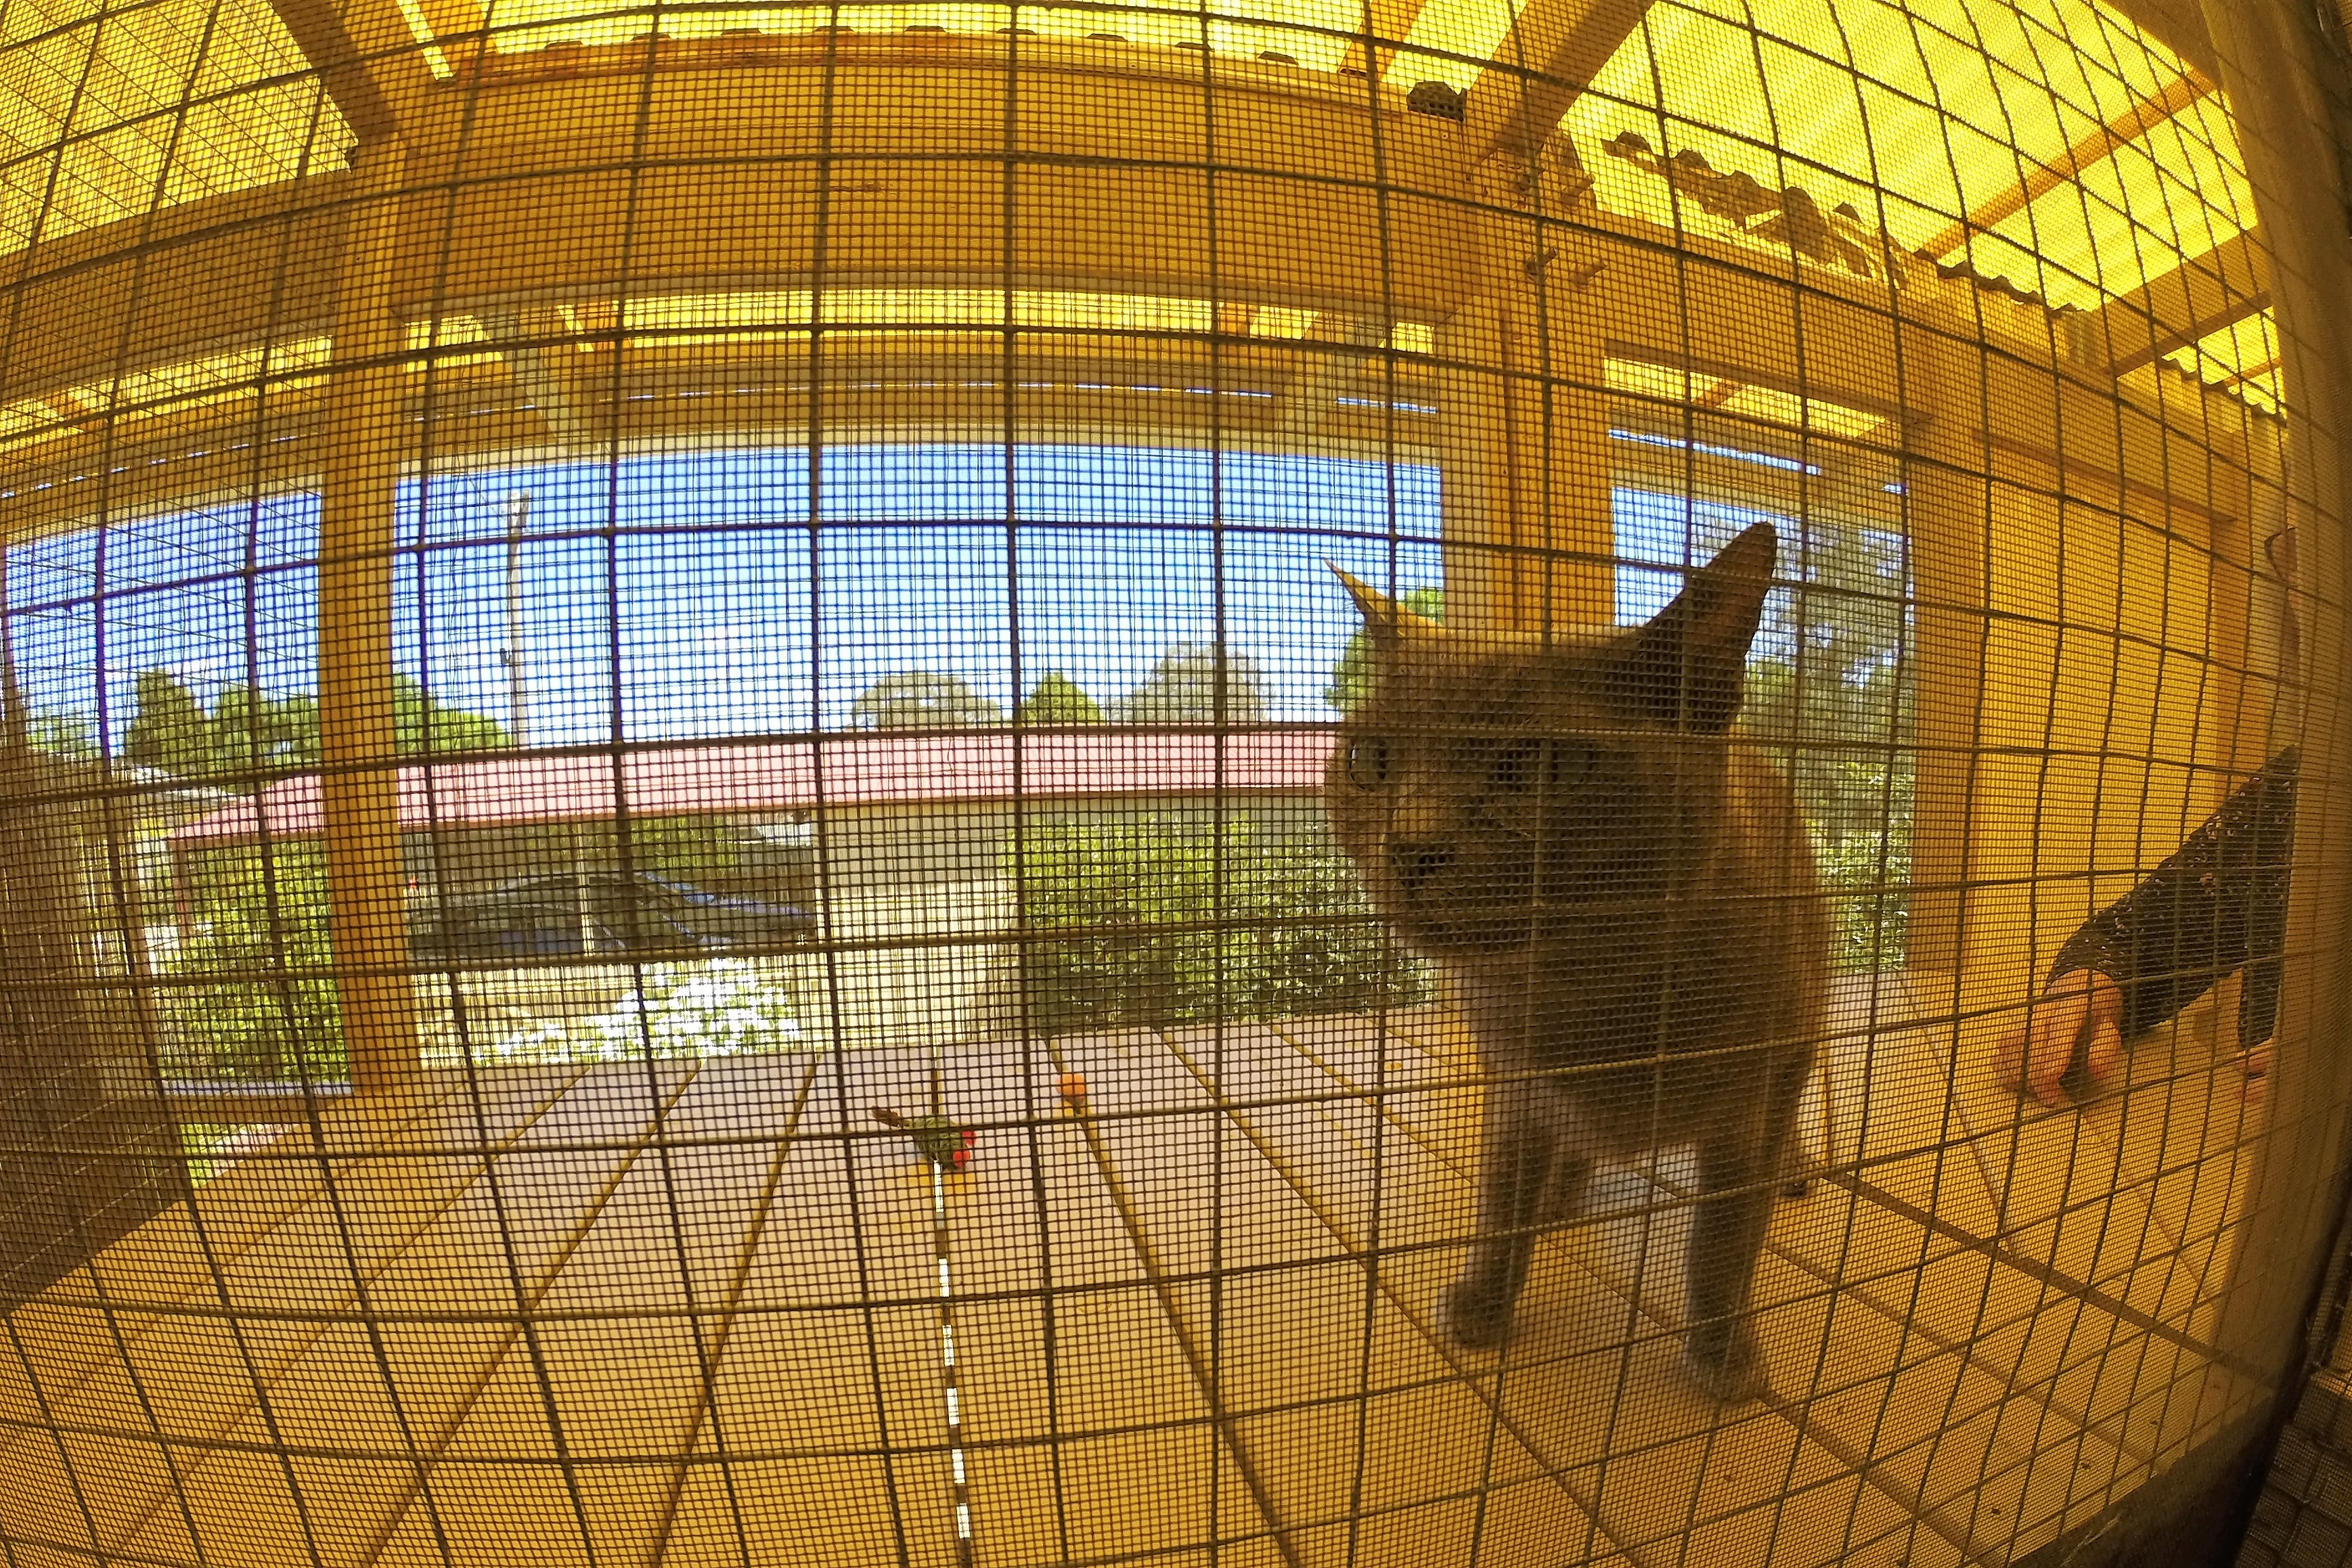 A cat in its outdoor cage on the verandah